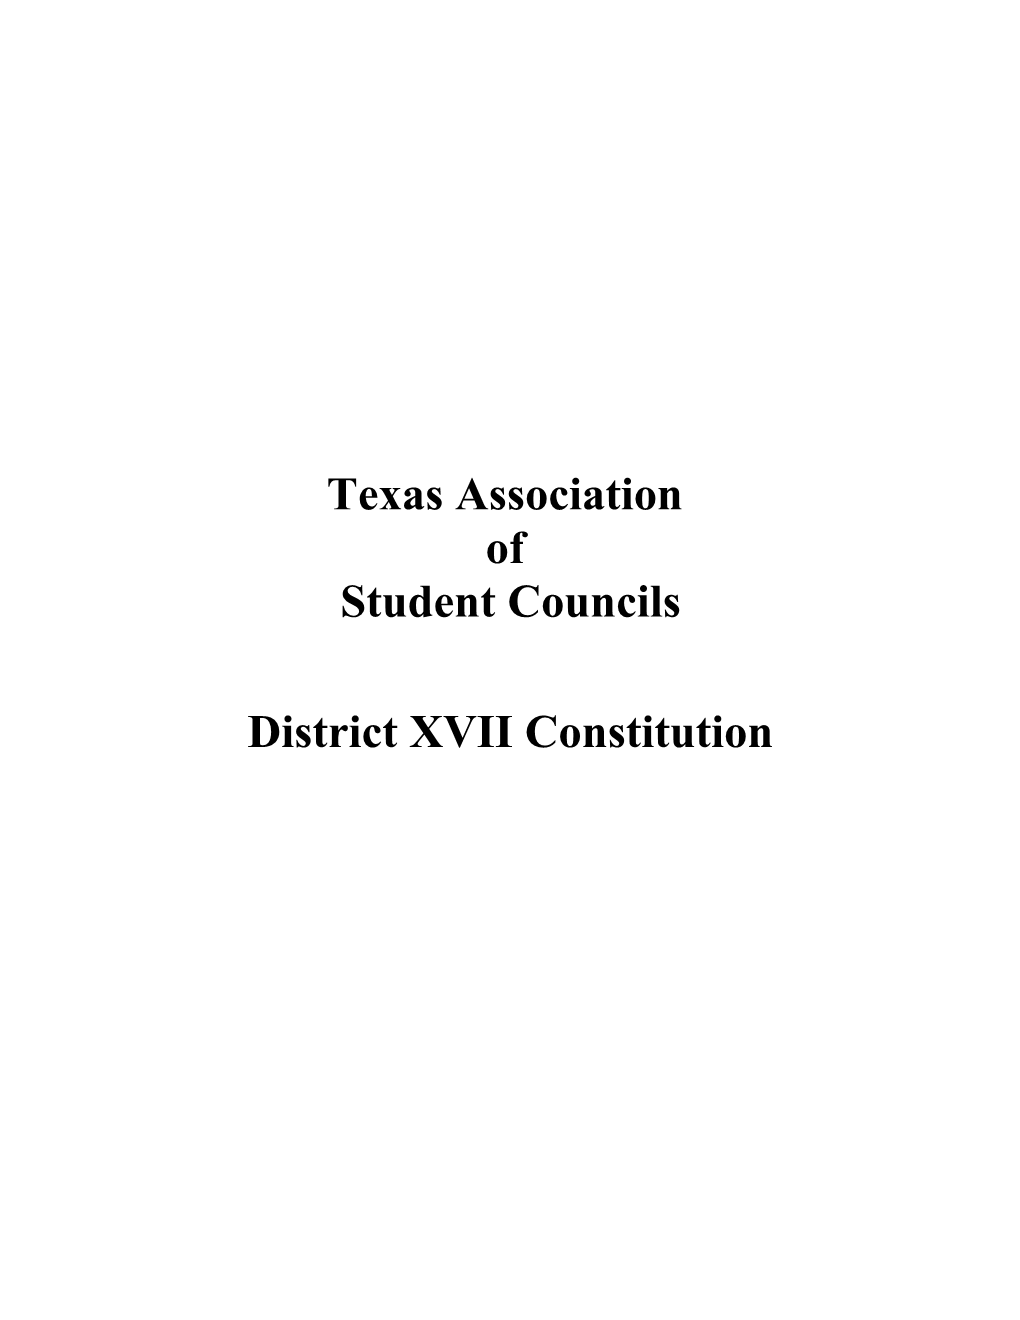 Constitution for the Texas Association of Student Councils District XVII